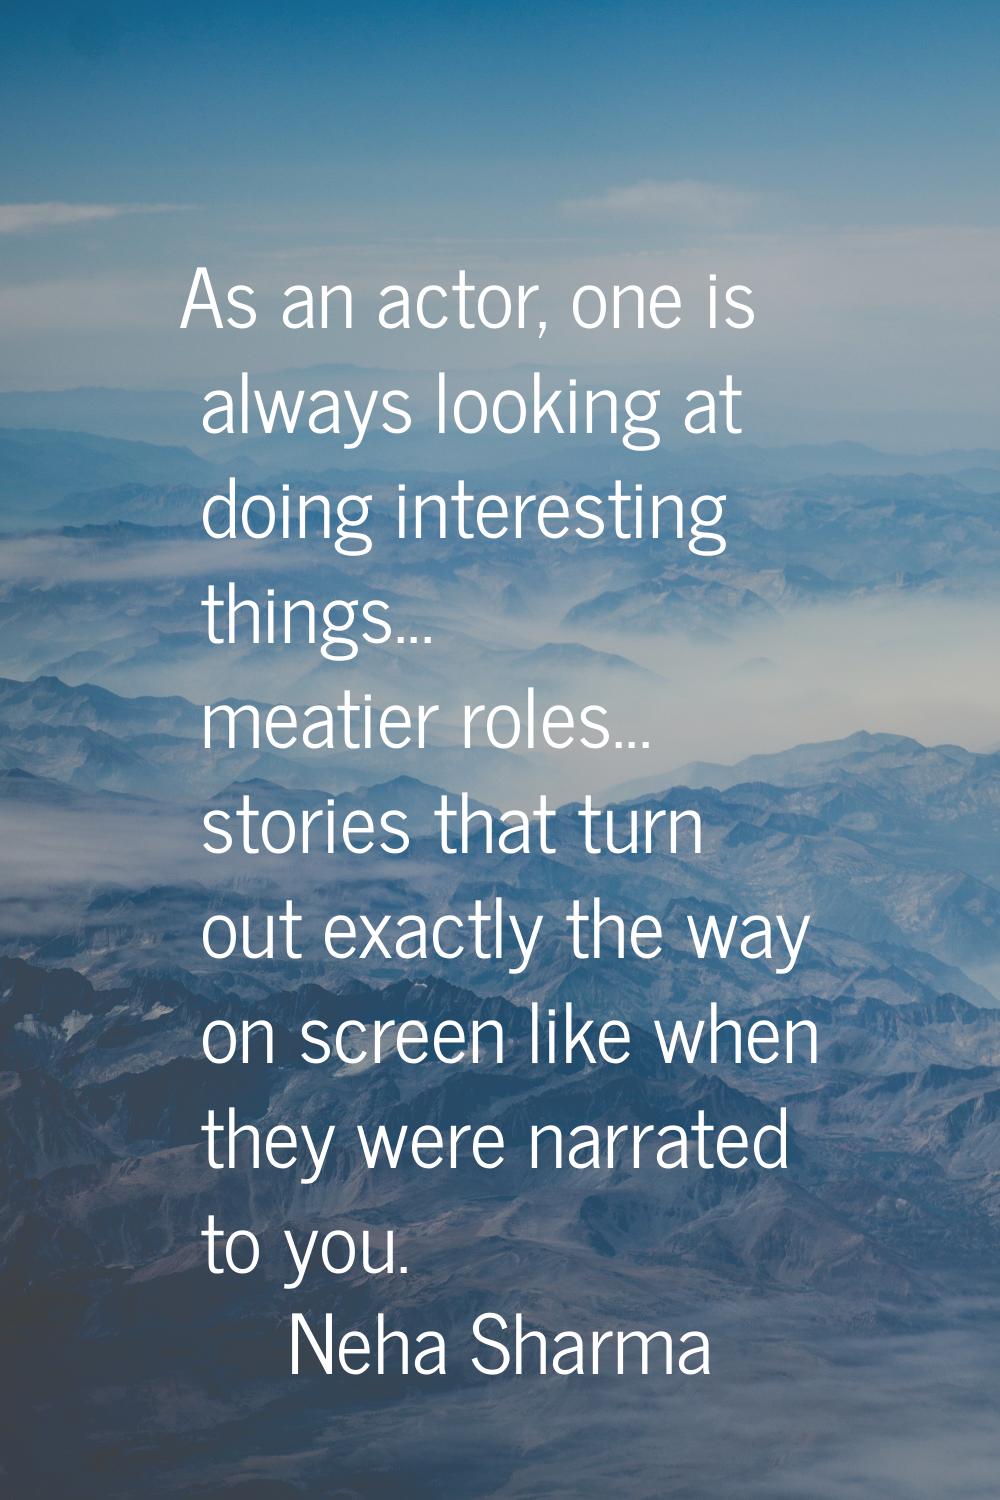 As an actor, one is always looking at doing interesting things... meatier roles... stories that tur